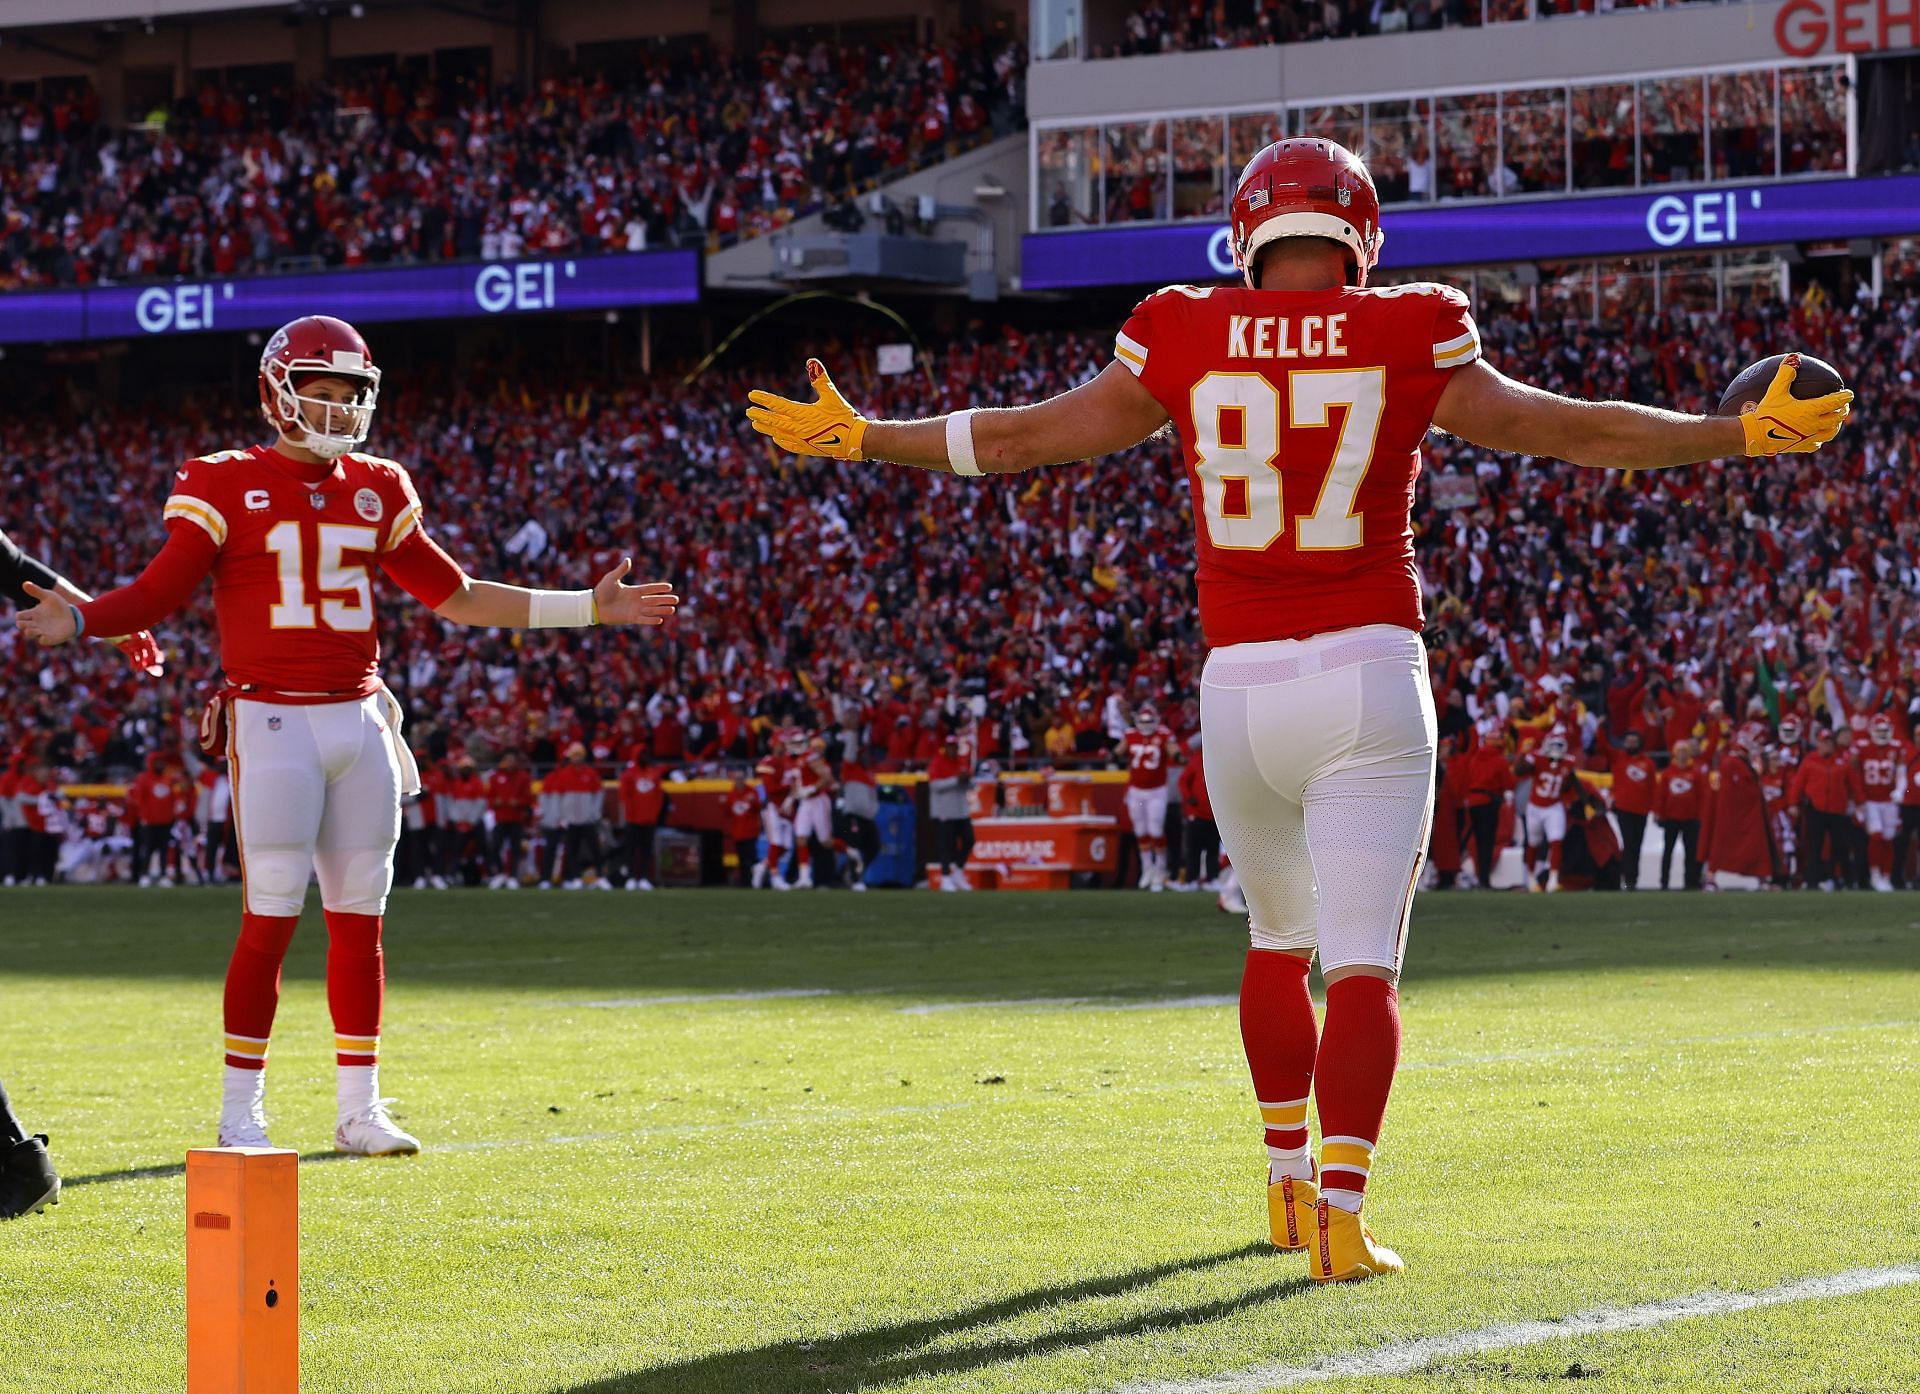 Kansas City Chiefs no longer have as star-studded a line-up as before